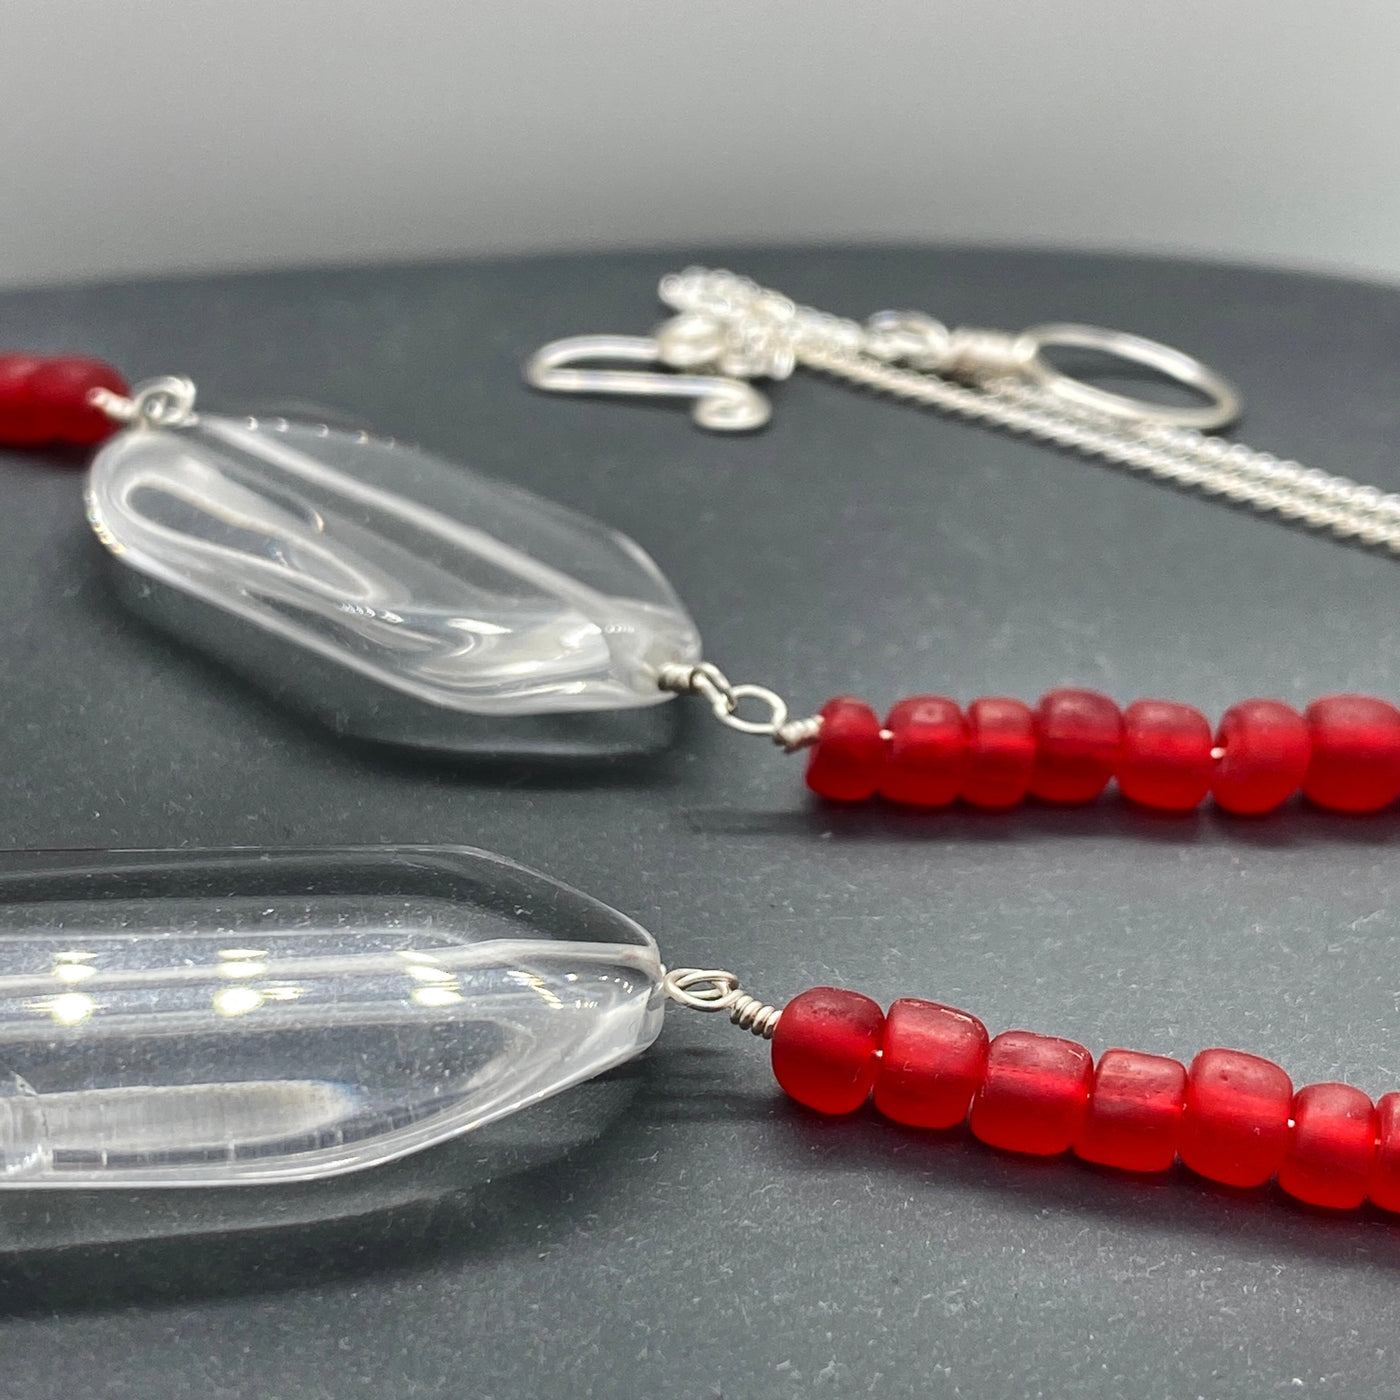 Red and white glass beads necklace